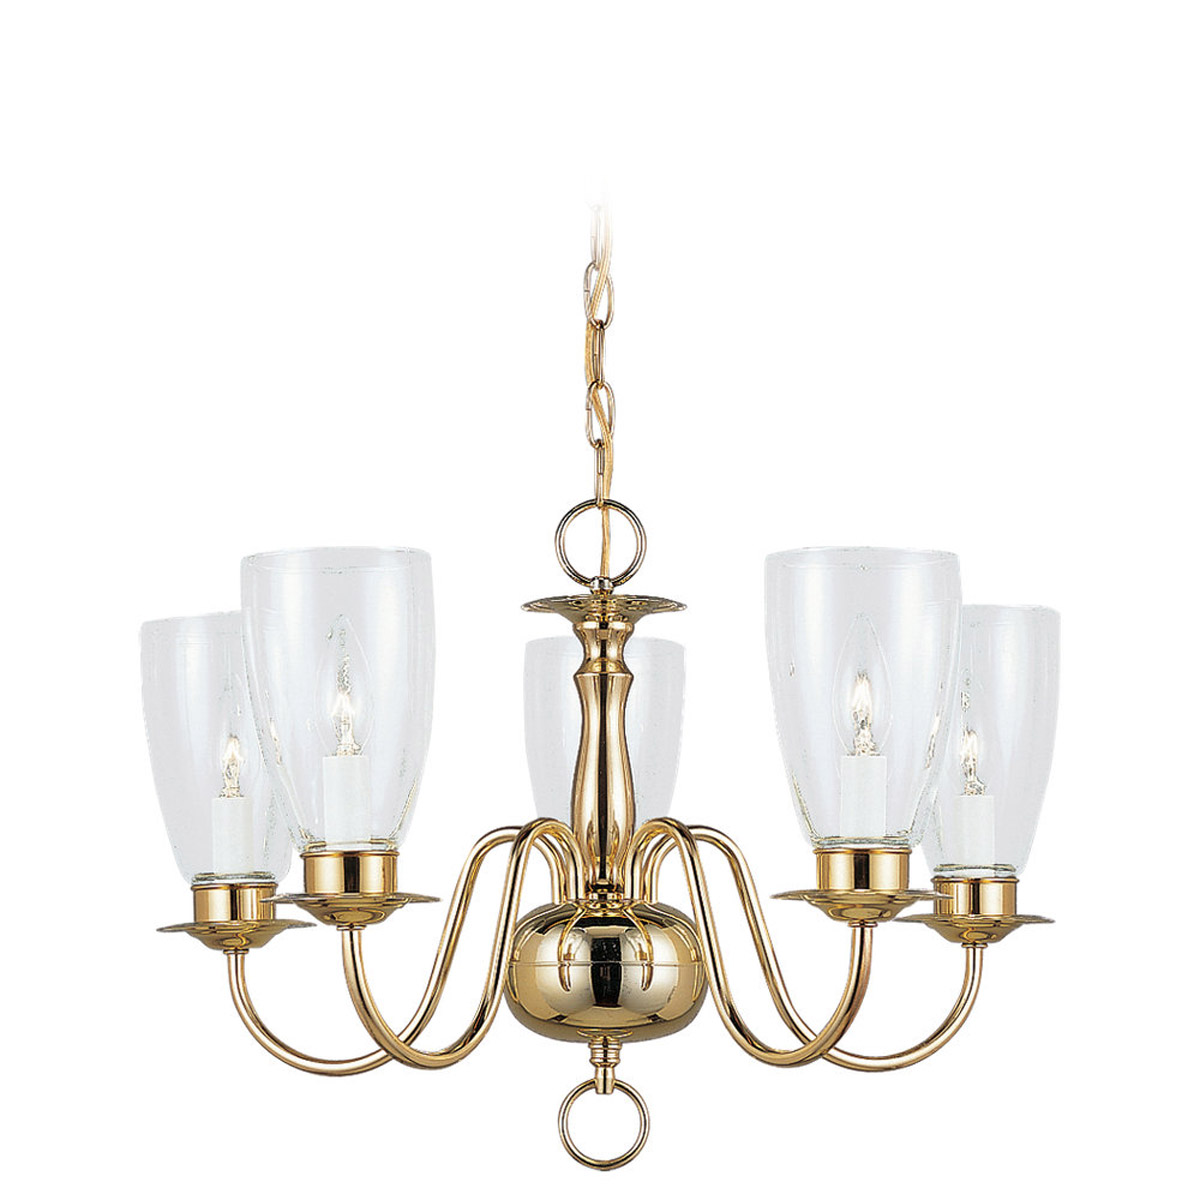 Sea Gull Lighting Traditional 5 Light Chandelier in Polished Brass 3314-02